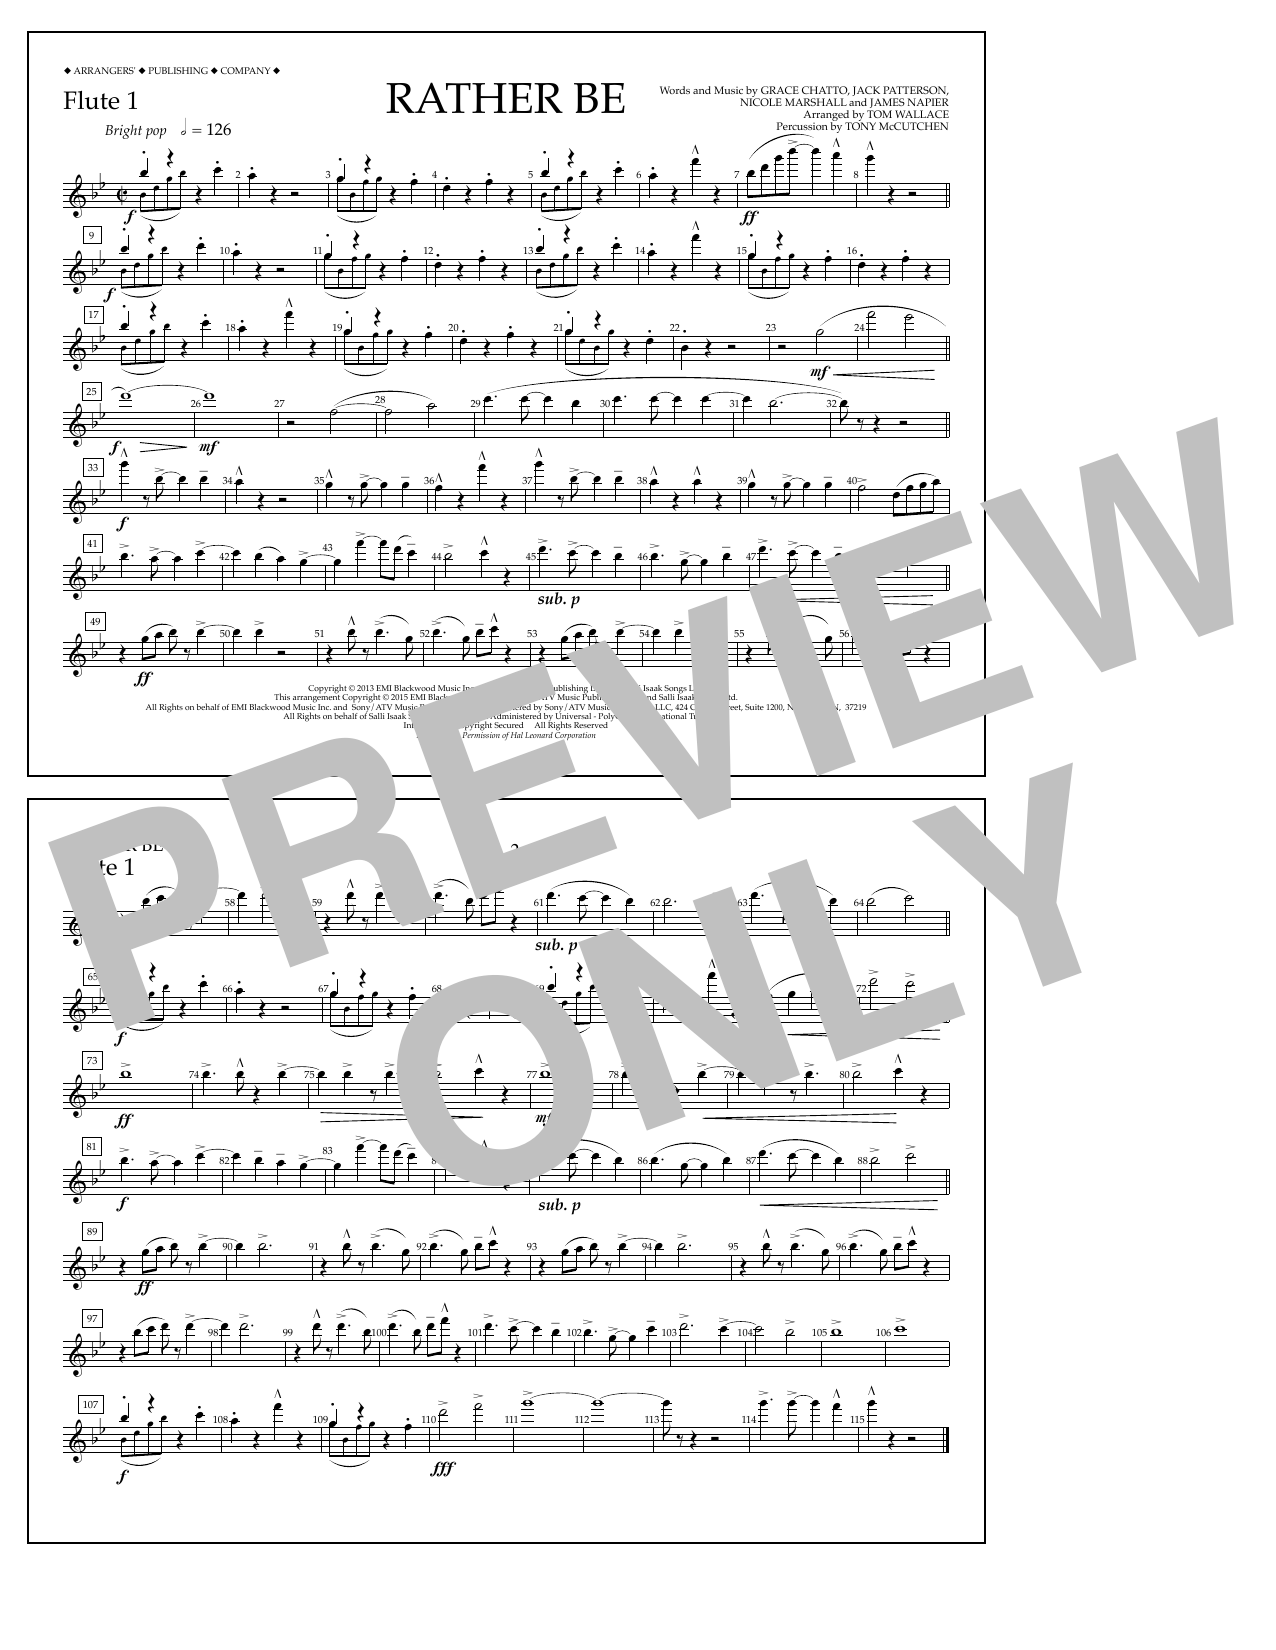 Download Tom Wallace Rather Be - Flute 1 Sheet Music